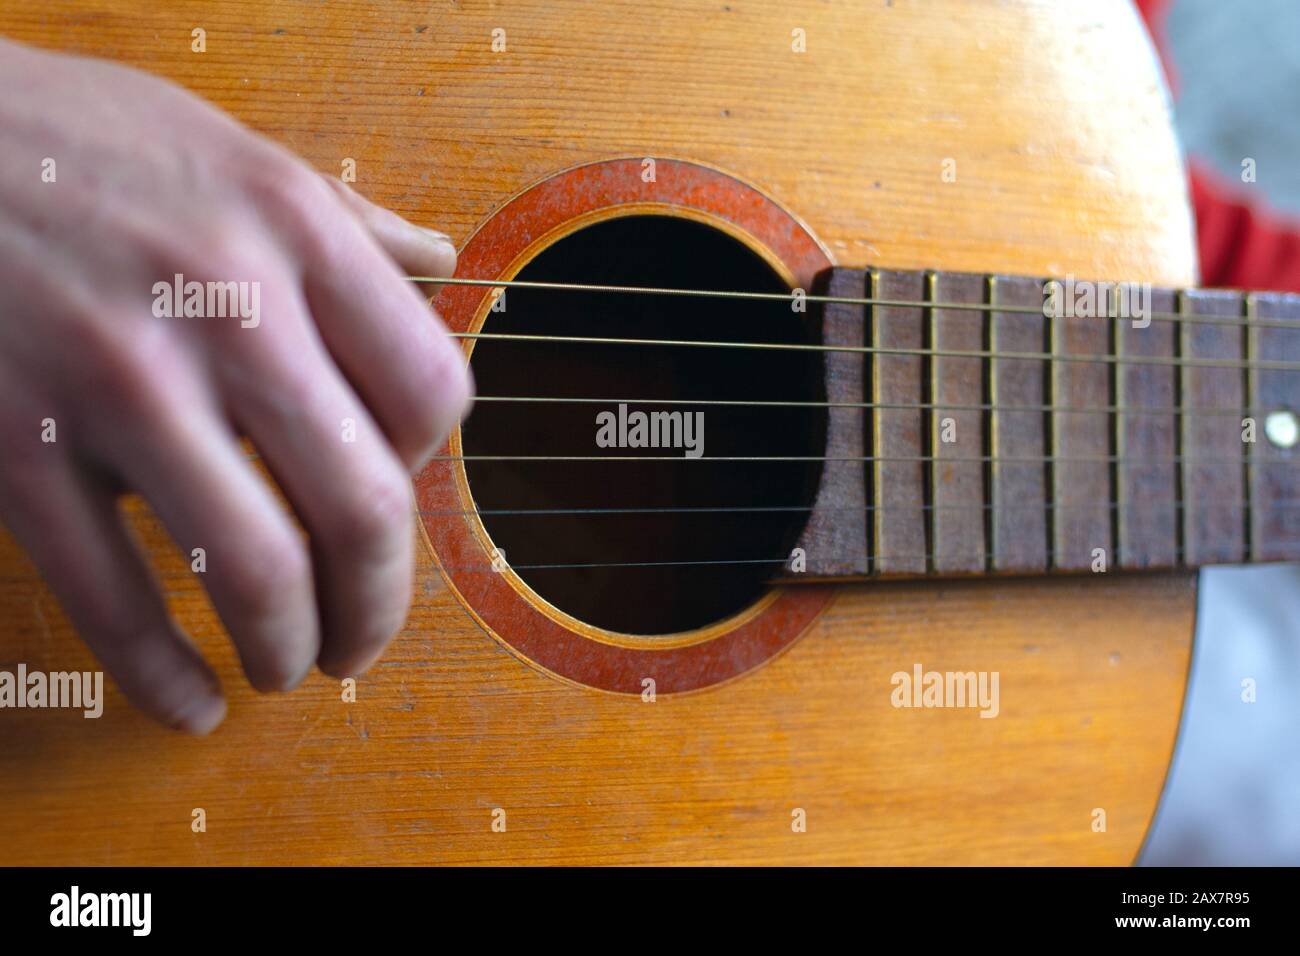 play with fingers fingering strings on a classic acoustic guitar. live music concept. Stock Photo